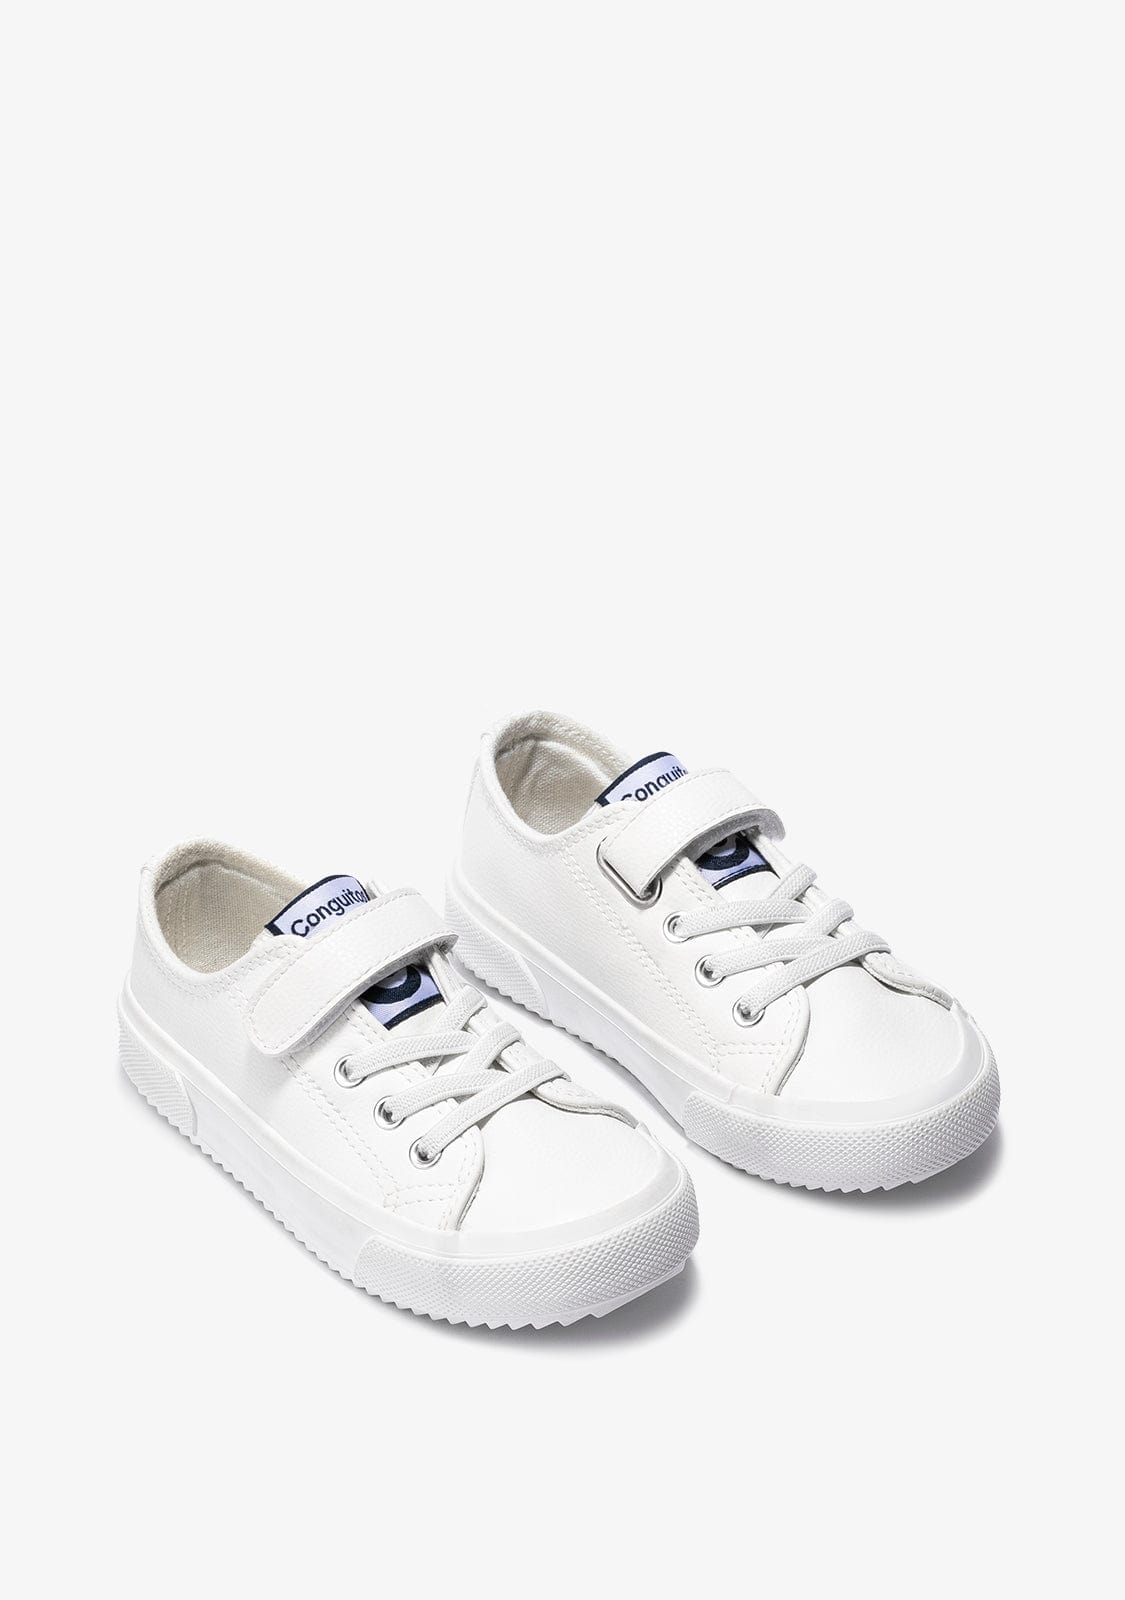 CONGUITOS Shoes Unisex White Adherent Strip Sneakers Micronapa